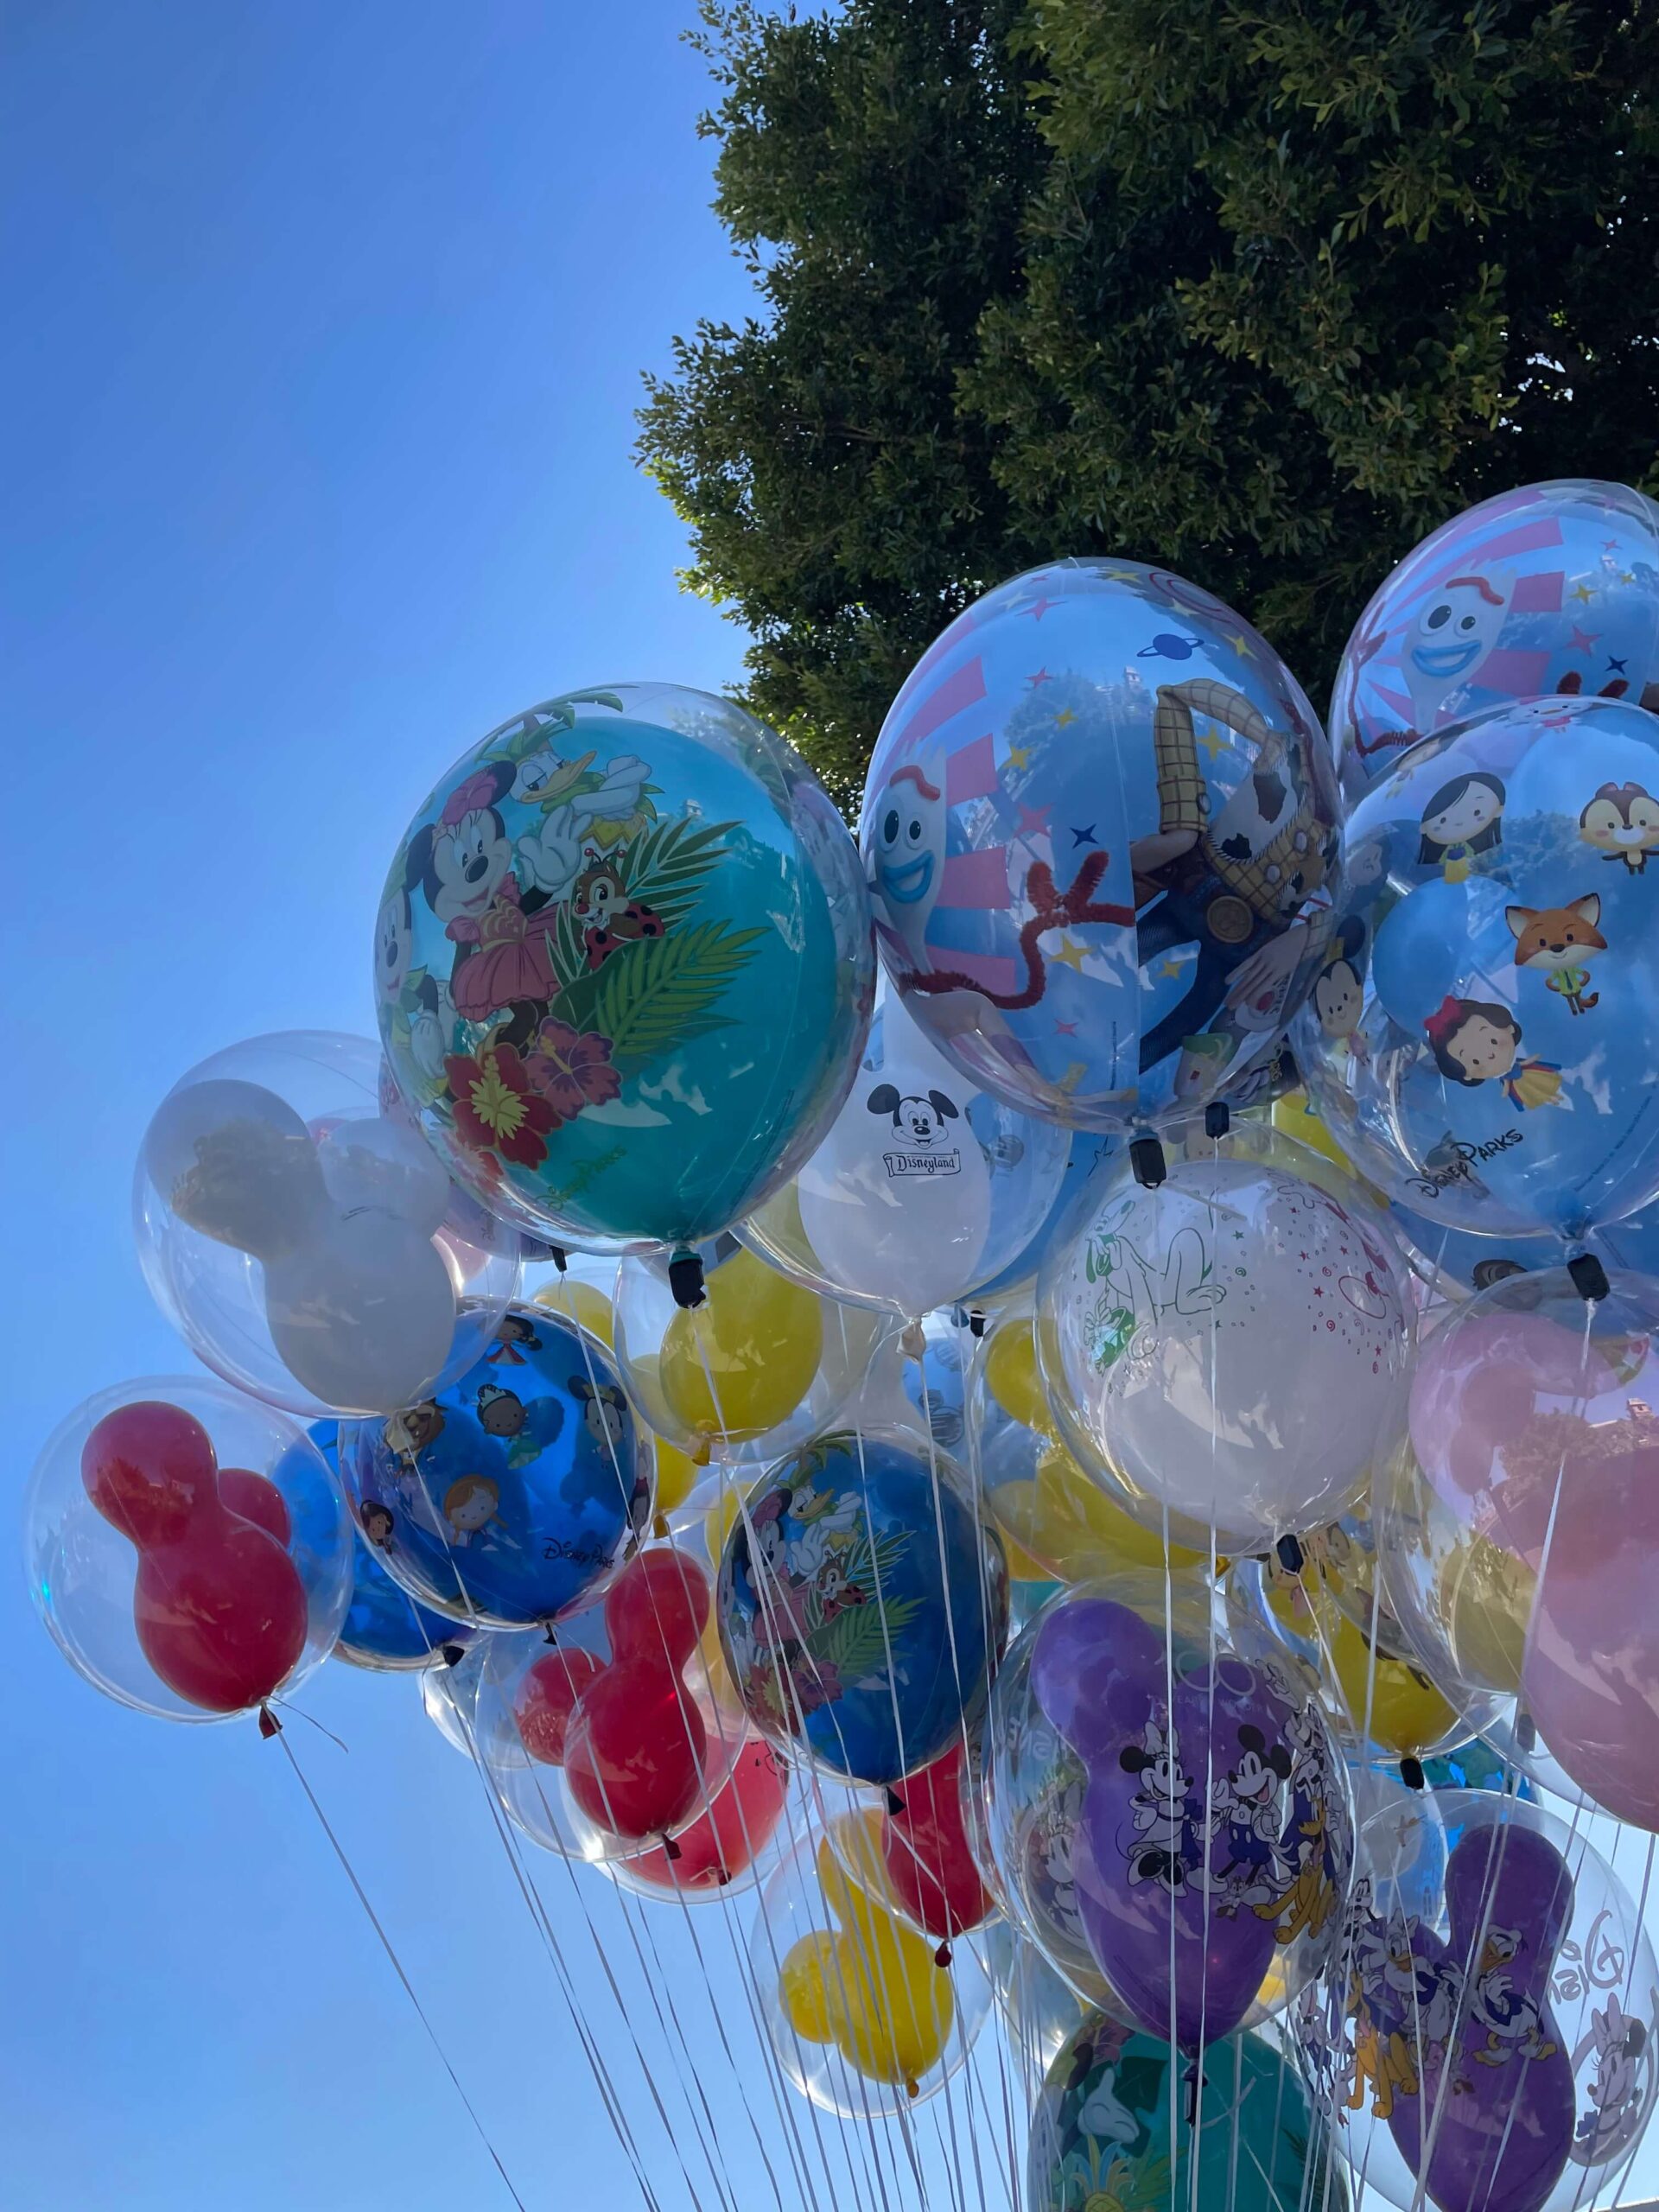 a collection of disneyland balloons against the background of the blue sky